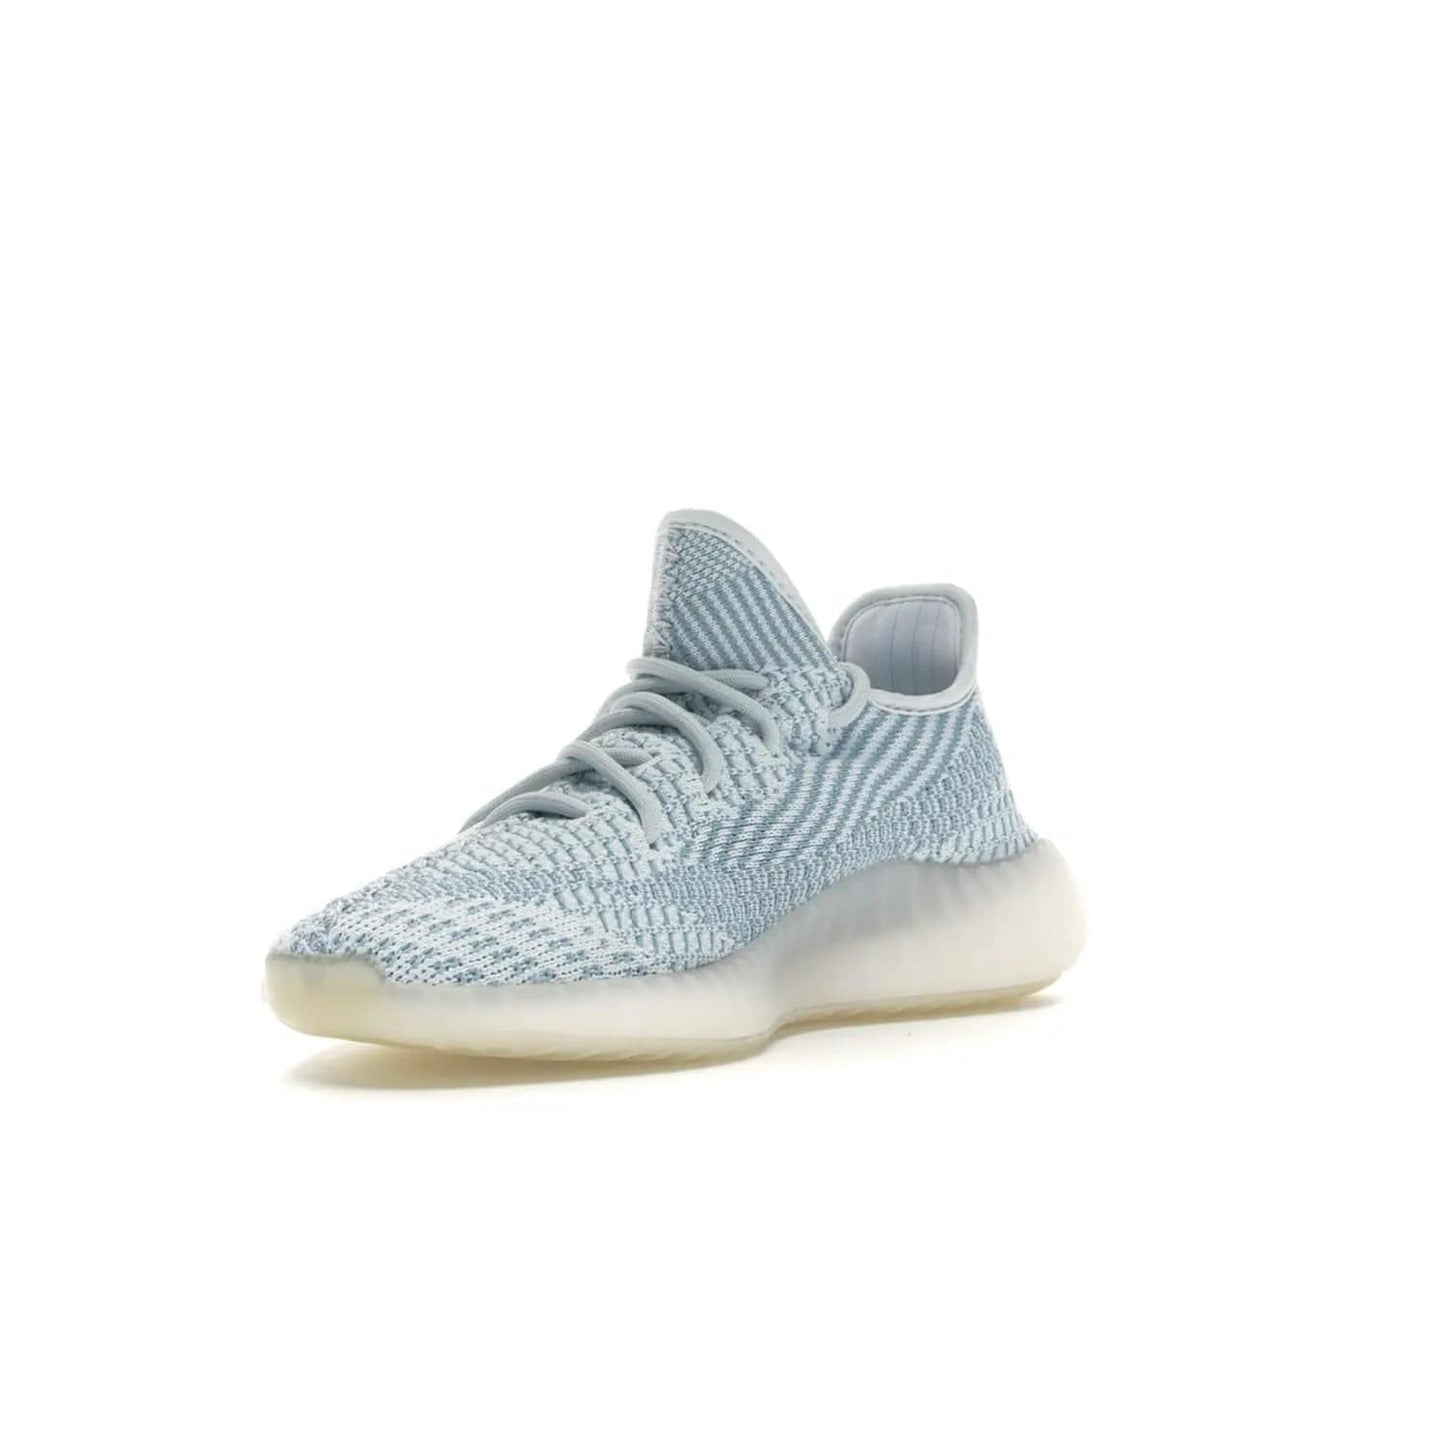 adidas Yeezy Boost 350 V2 Cloud White (Non-Reflective) - Image 14 - Only at www.BallersClubKickz.com - Uniquely designed adidas Yeezy Boost 350 V2 Cloud White (Non-Reflective) with a Primeknit upper in shades of cream and blue with a contrasting hard sole. A fashion-forward sneaker with a transparent strip and blue-and-white patterns.